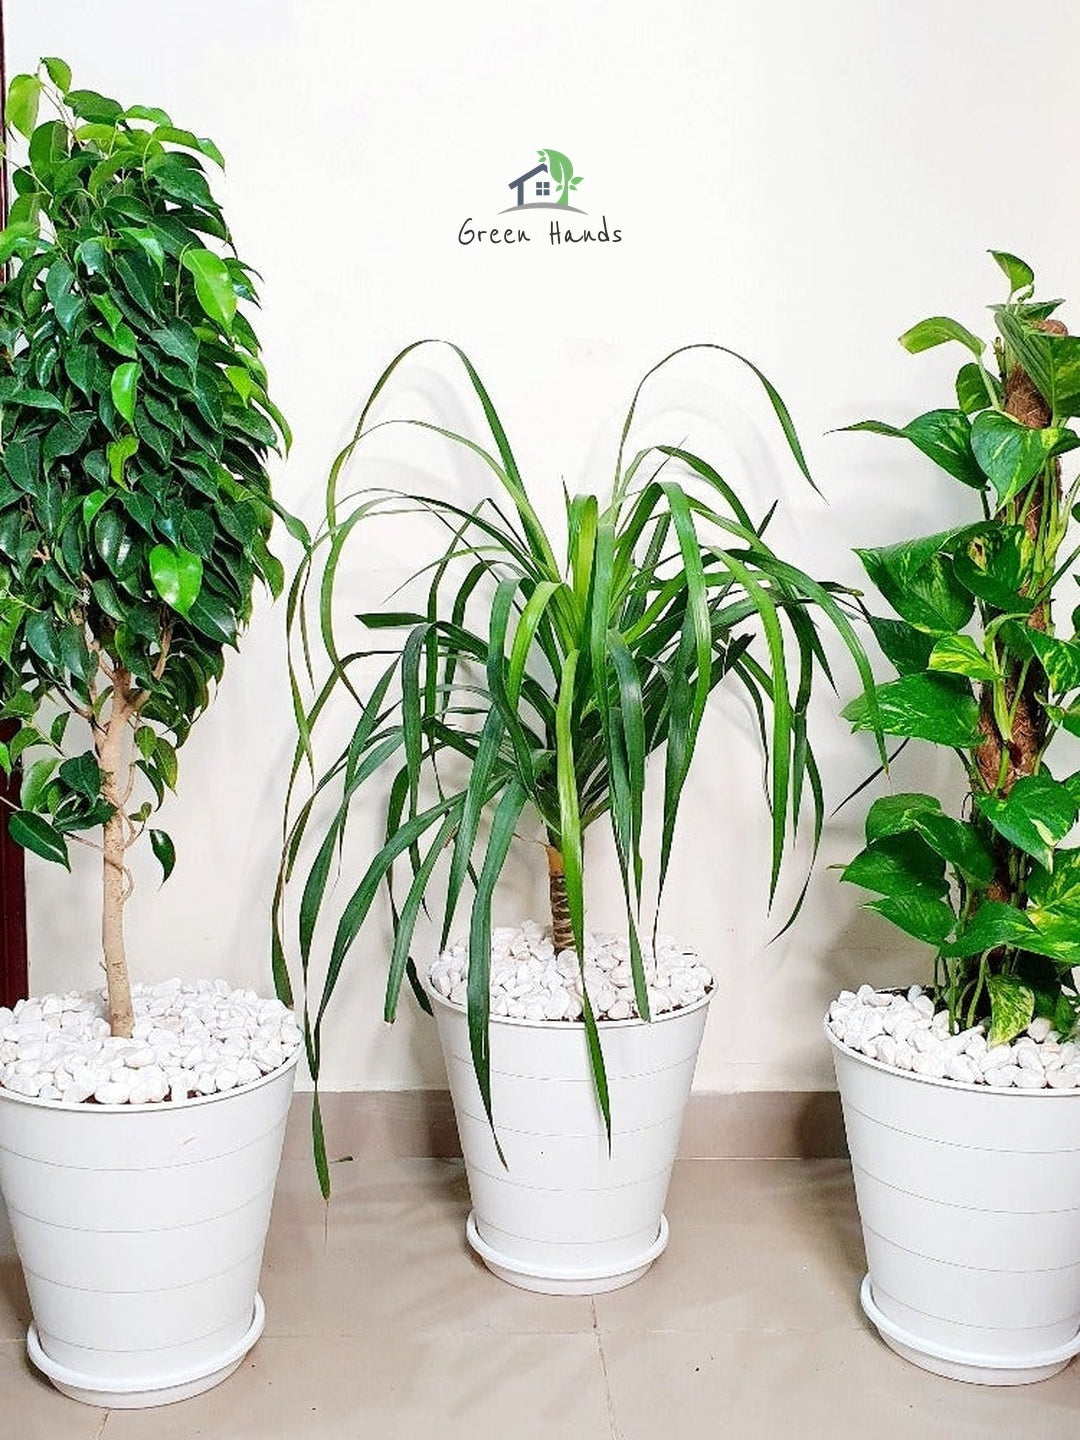 set of 3 Potted plants bundle that includes Money Plant, Ficus Benjamina, and Dragon Plant in ceramic pots - green hands